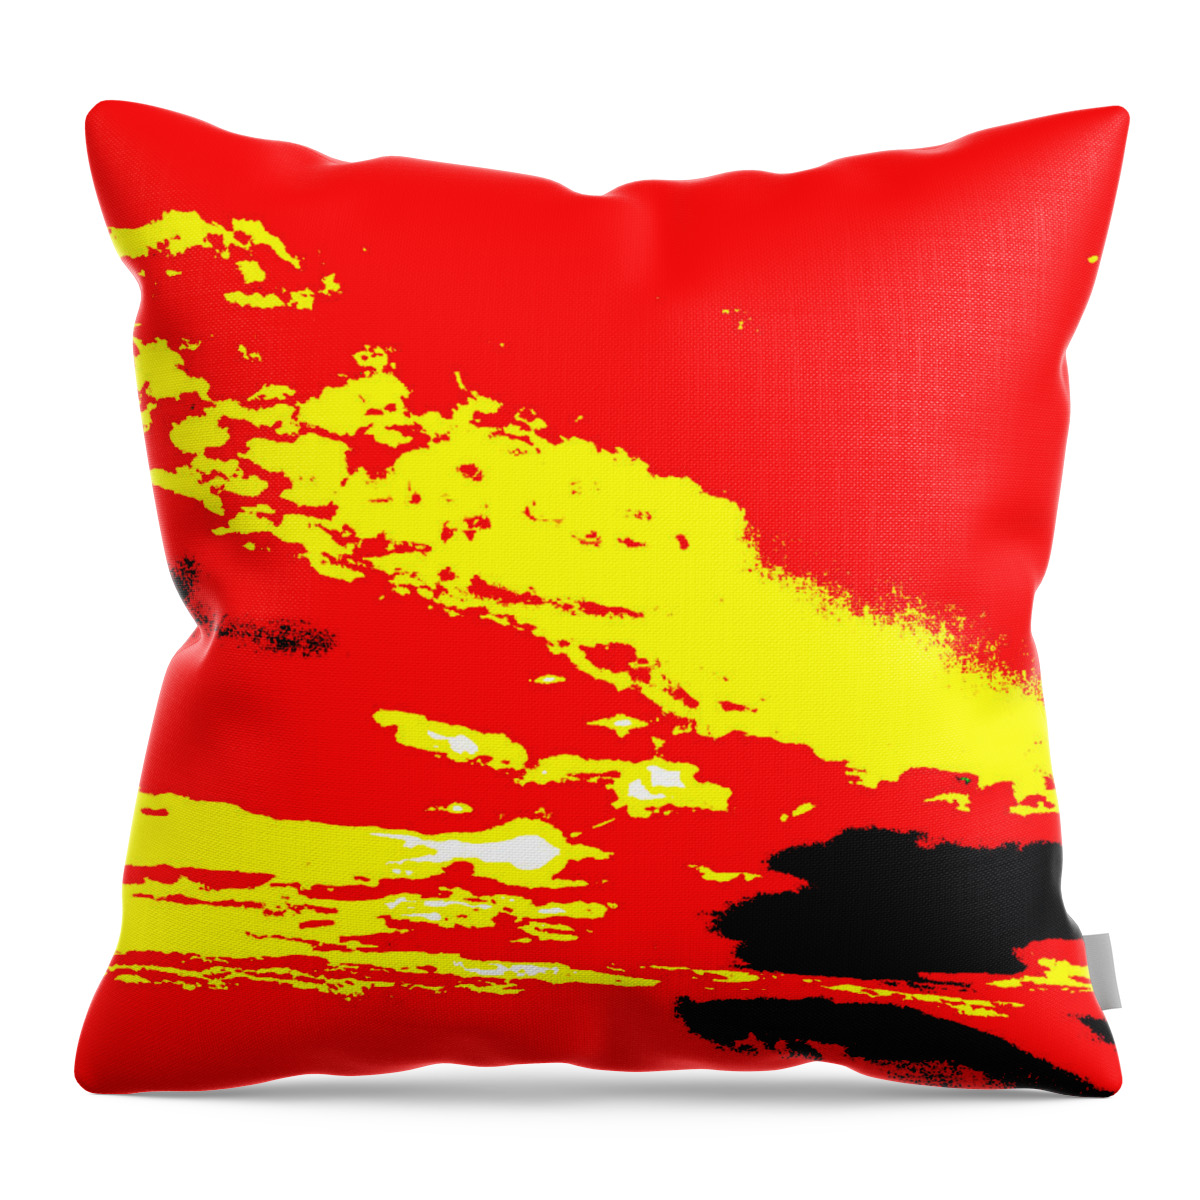  Throw Pillow featuring the painting Chastity 3 by Trevor A Smith